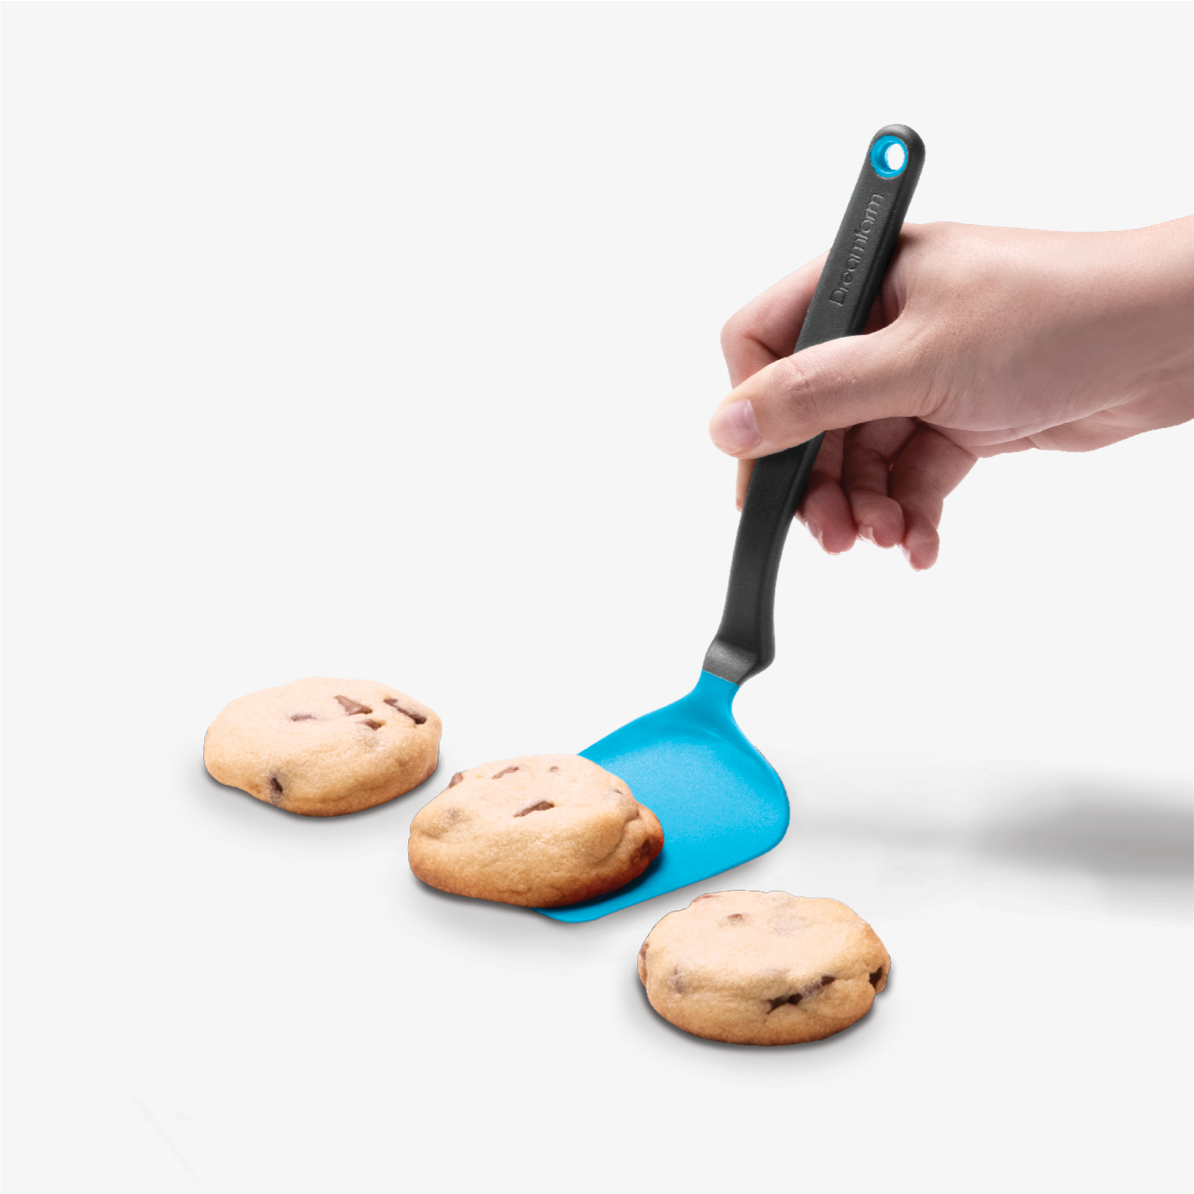 The Chopula's small, but just as mighty, sibling! The Mini Chopula's small, flexible head easily slides under food for a clean lift, making it perfect for cookies, eggs, and brownies. The angled handle and multi-curved head reach every corner of any pan or tray, while keeping your hand away from food and heat.&nbsp;